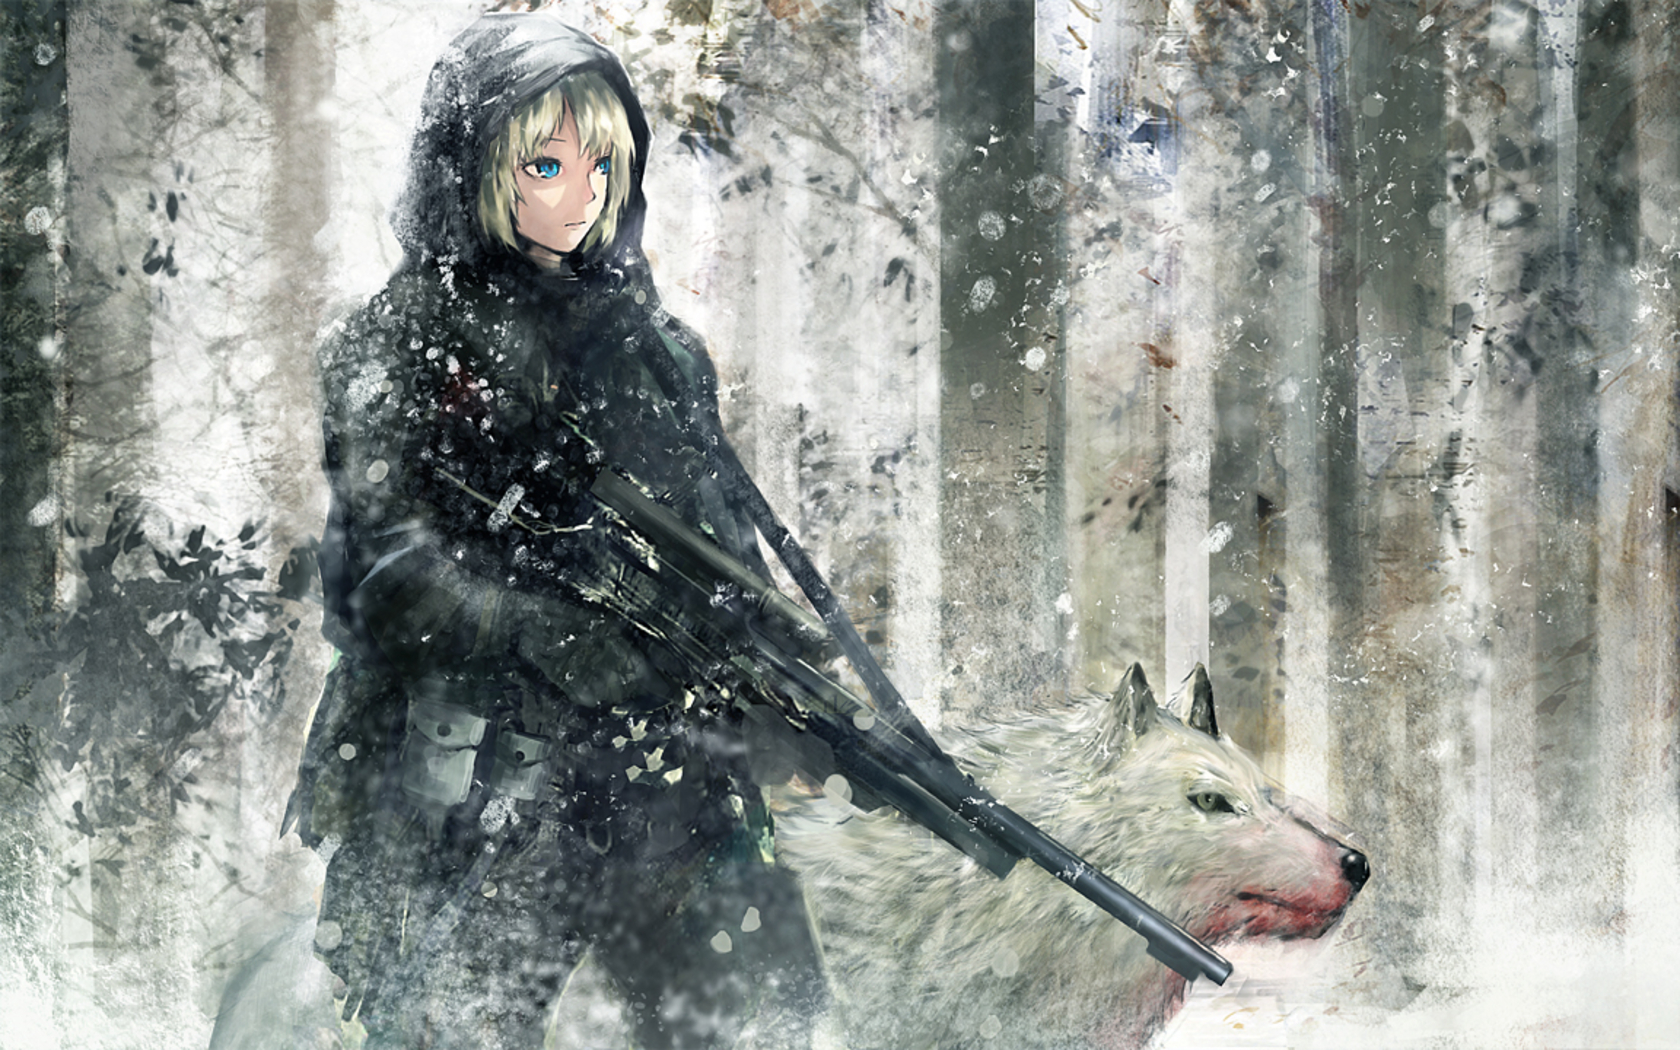 Anime 1680x1050 anime anime girls wolf snow forest snipers blonde Seafh girls with guns blood hunter hoods cold winter women women outdoors outdoors animals mammals machine gun anime girls with guns